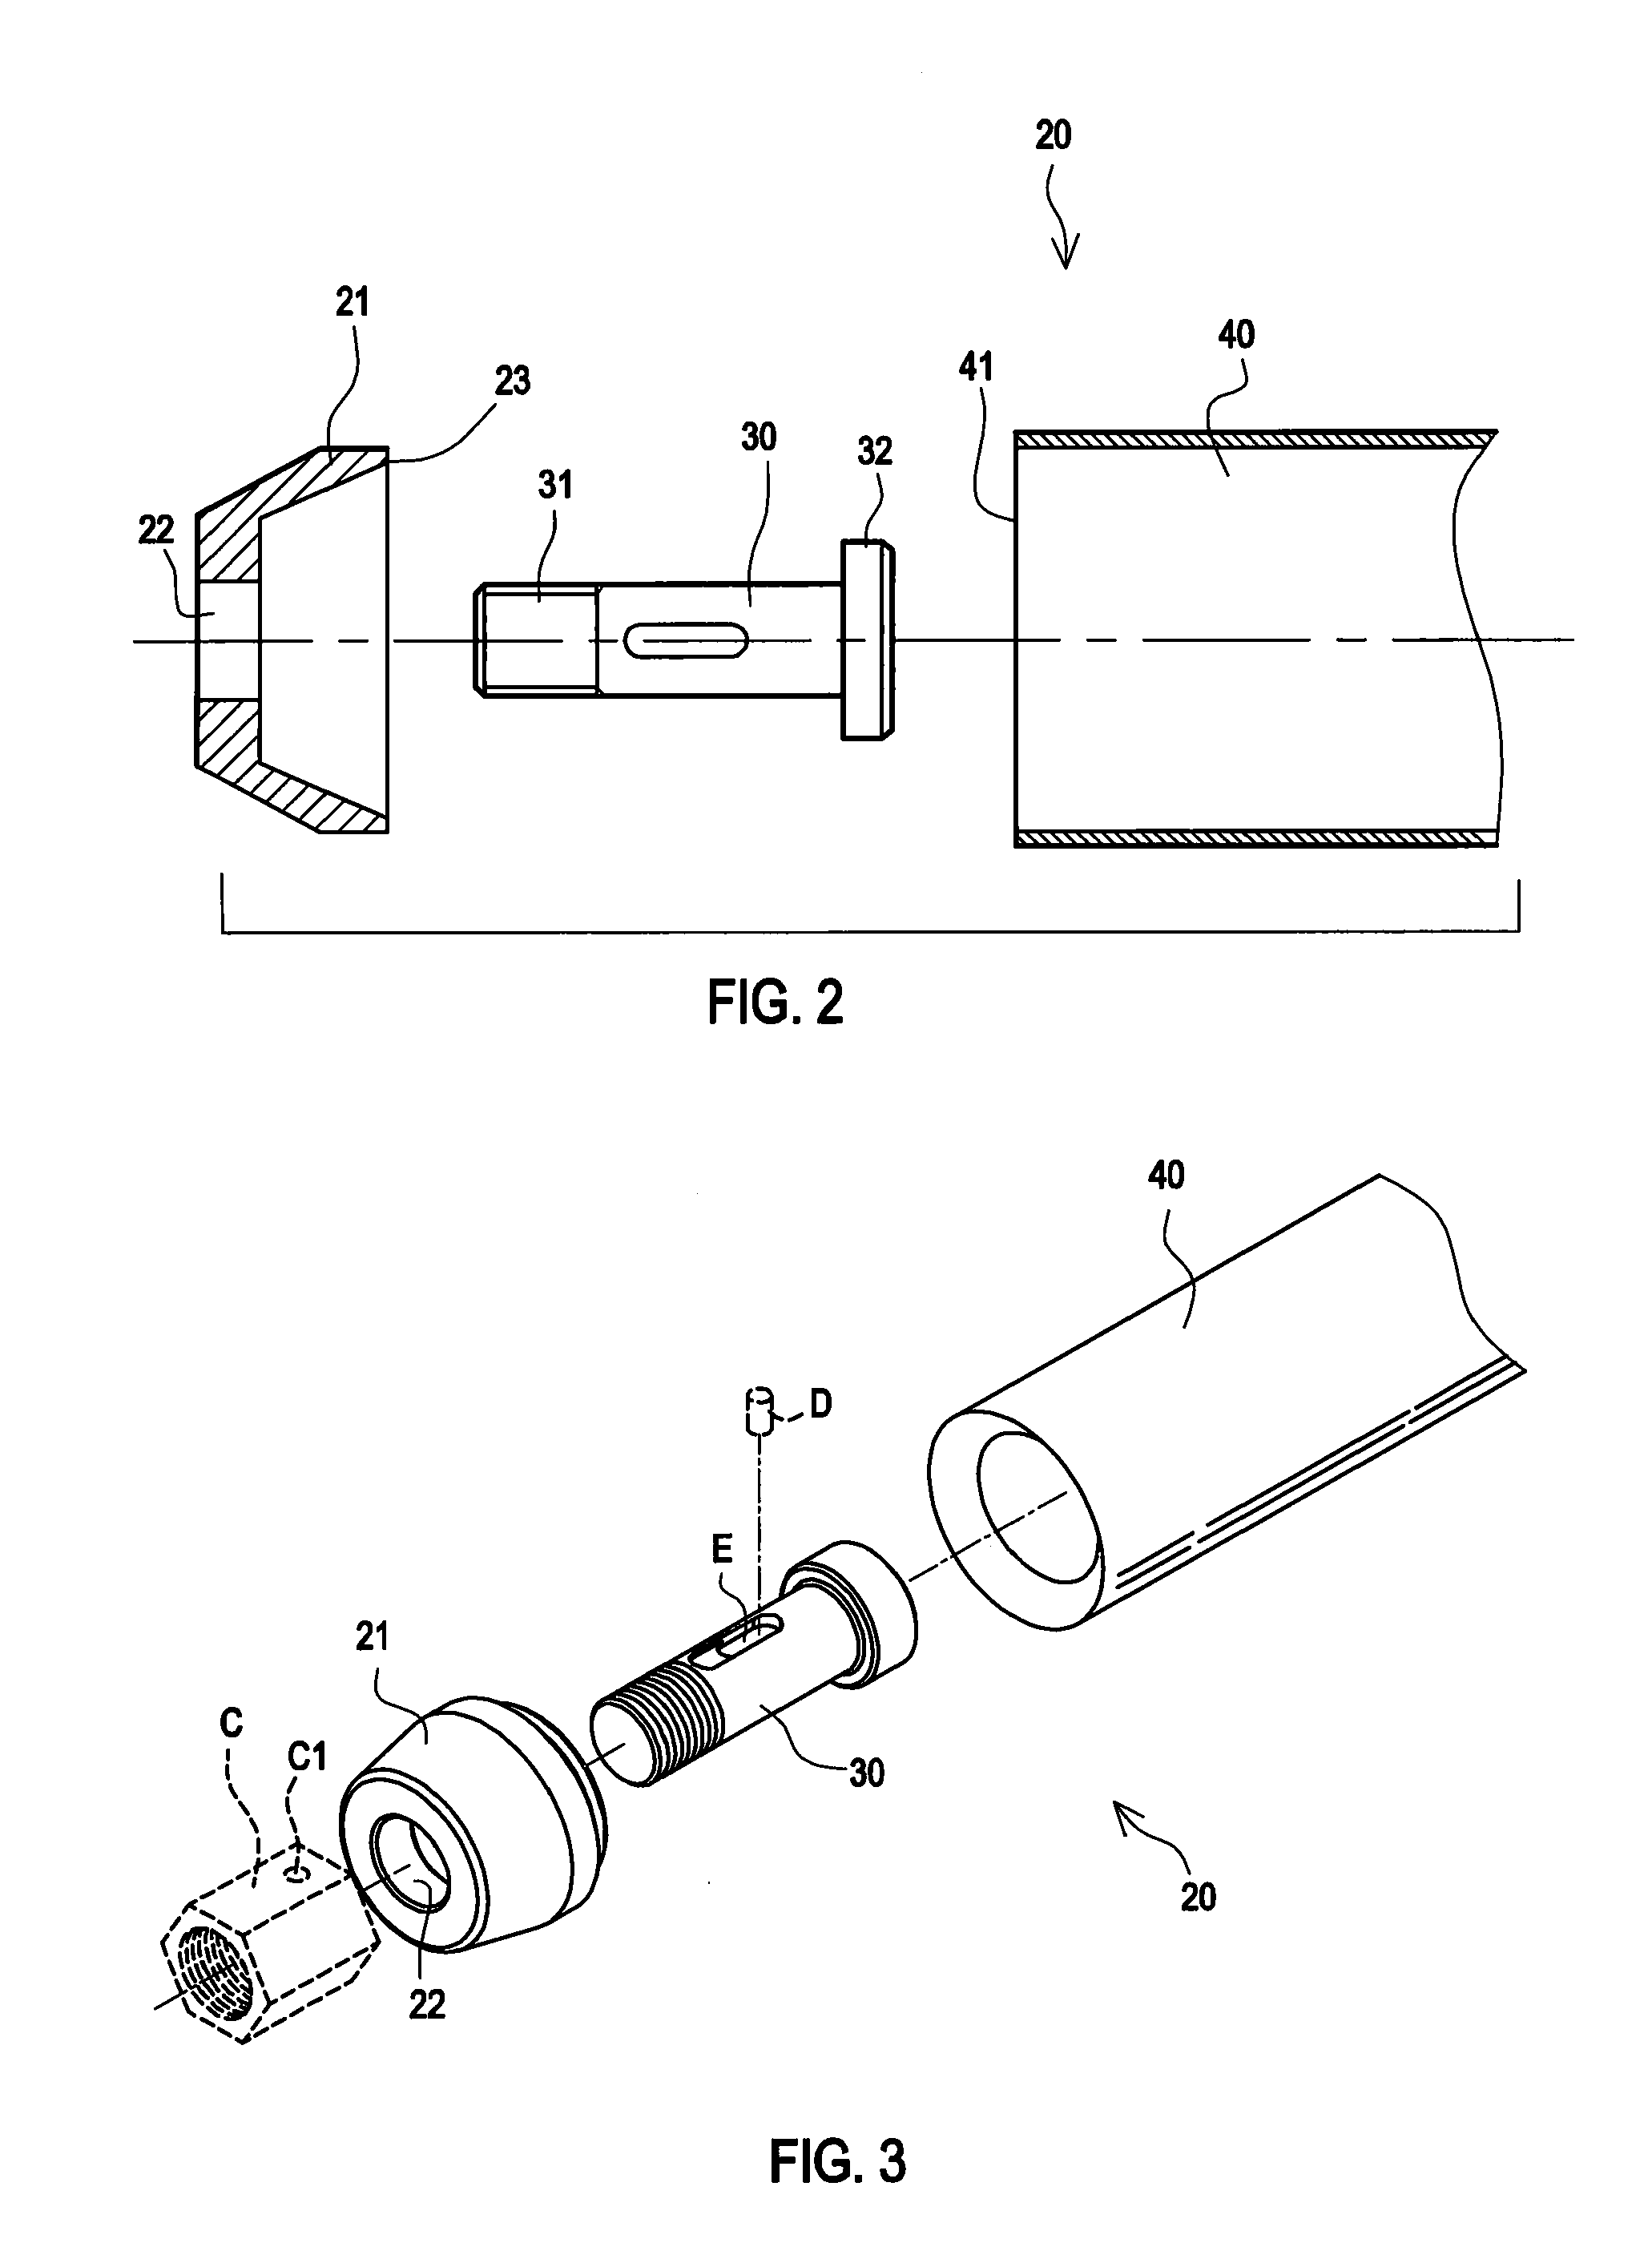 Manufacturing method for rod member of three-dimensional statically indeterminate truss structure